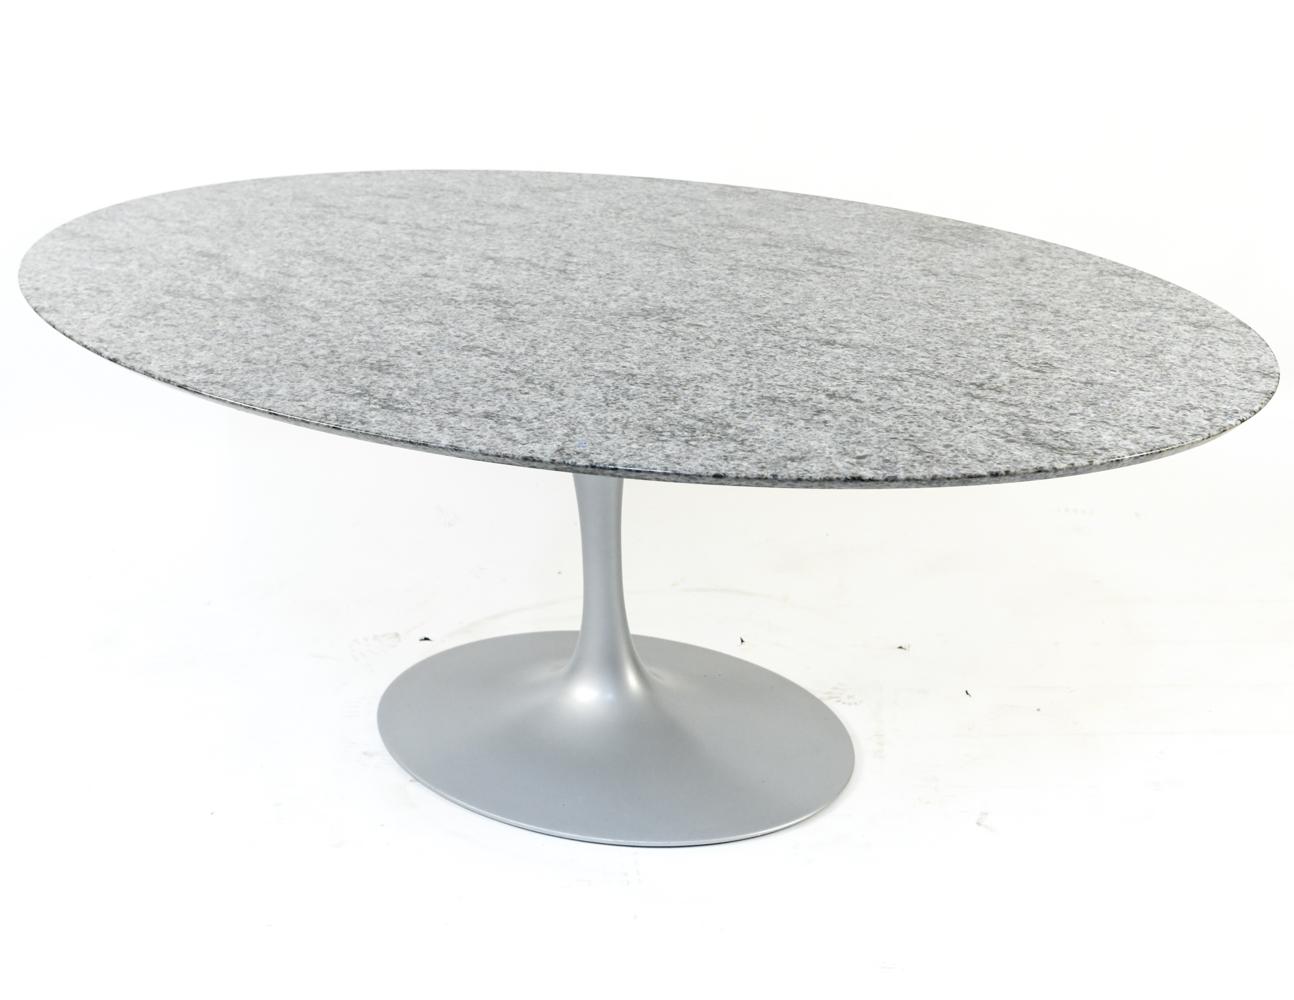 Contemporary Saarinen for Knoll Oval Marble Top Dining Table